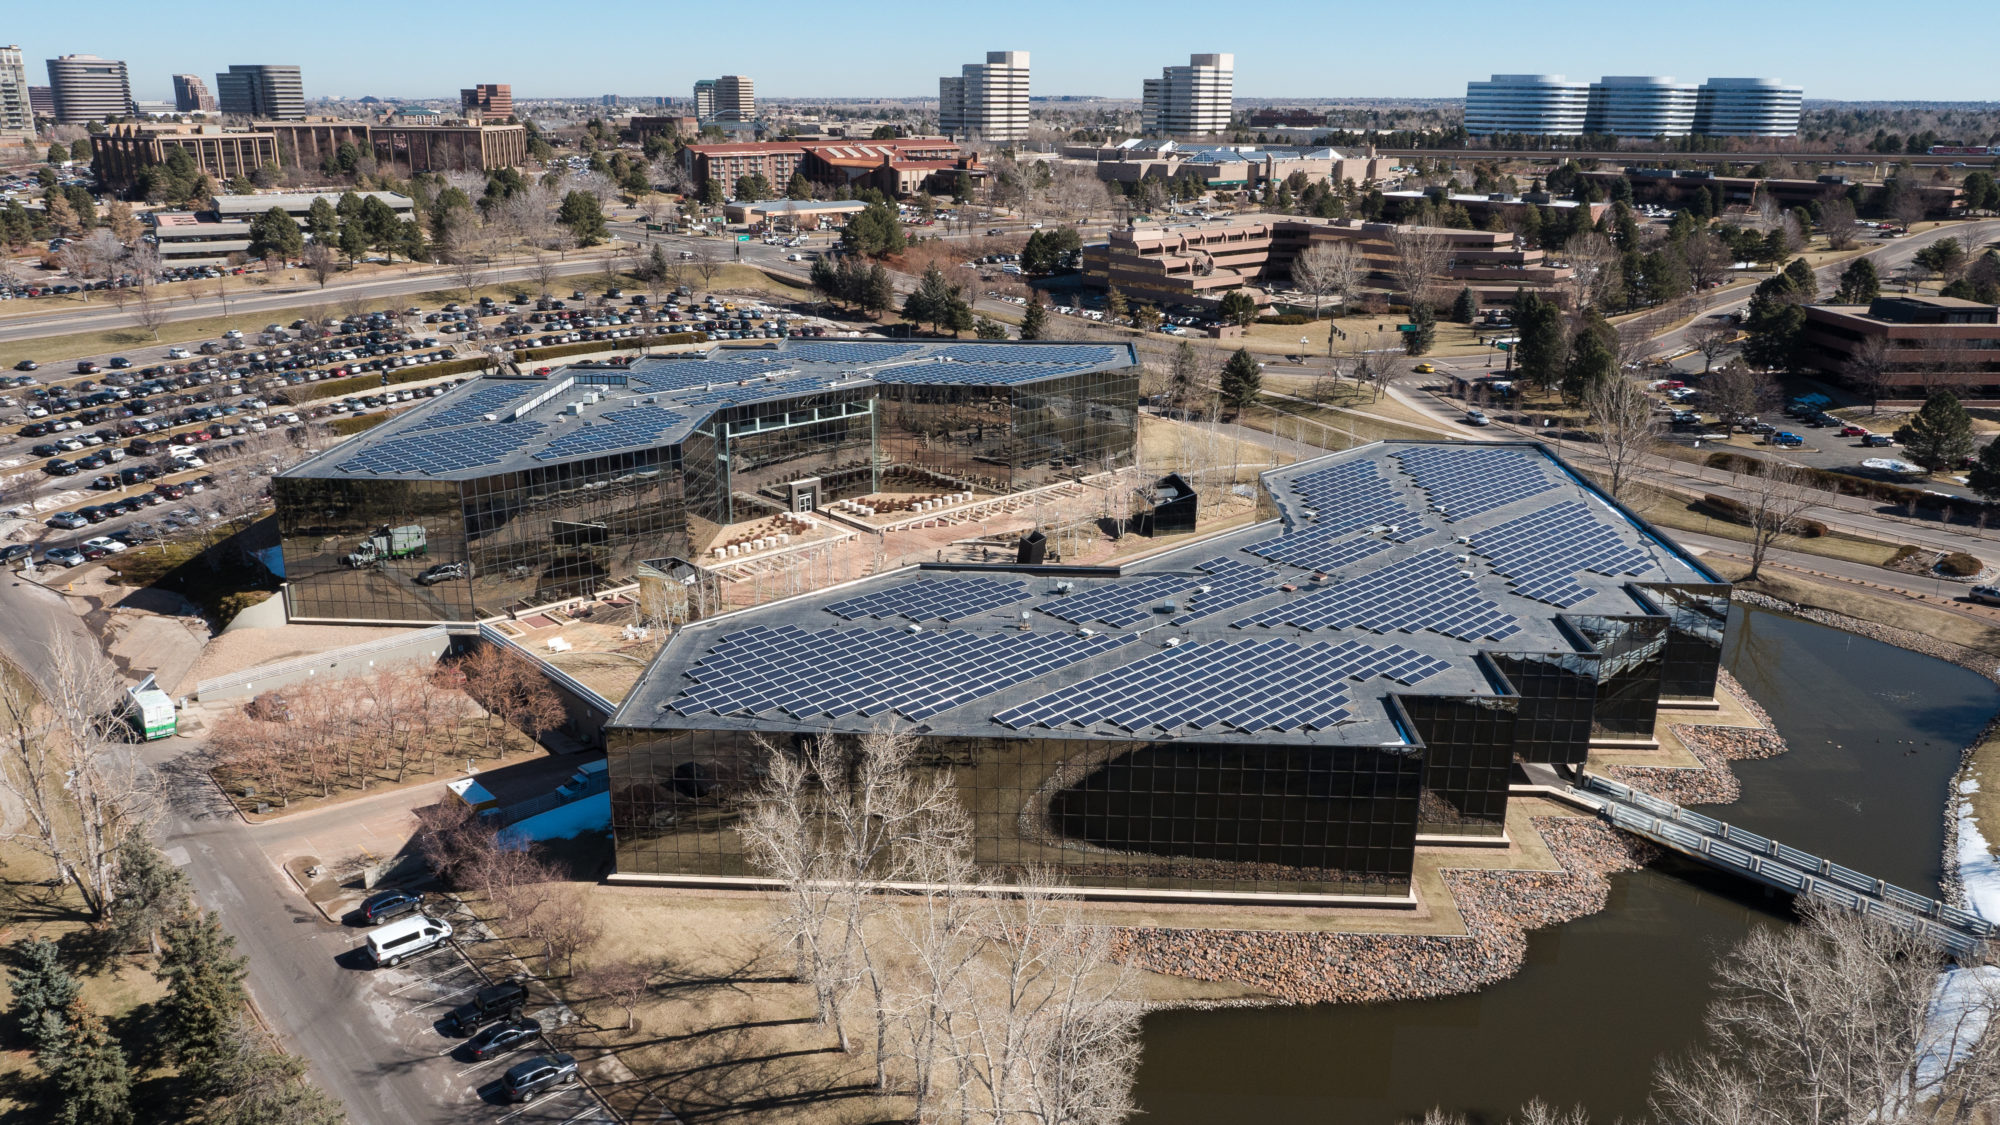 Aerial view of Harlequin Plaza in Denver, featuring a large solar panel installation on the roof.